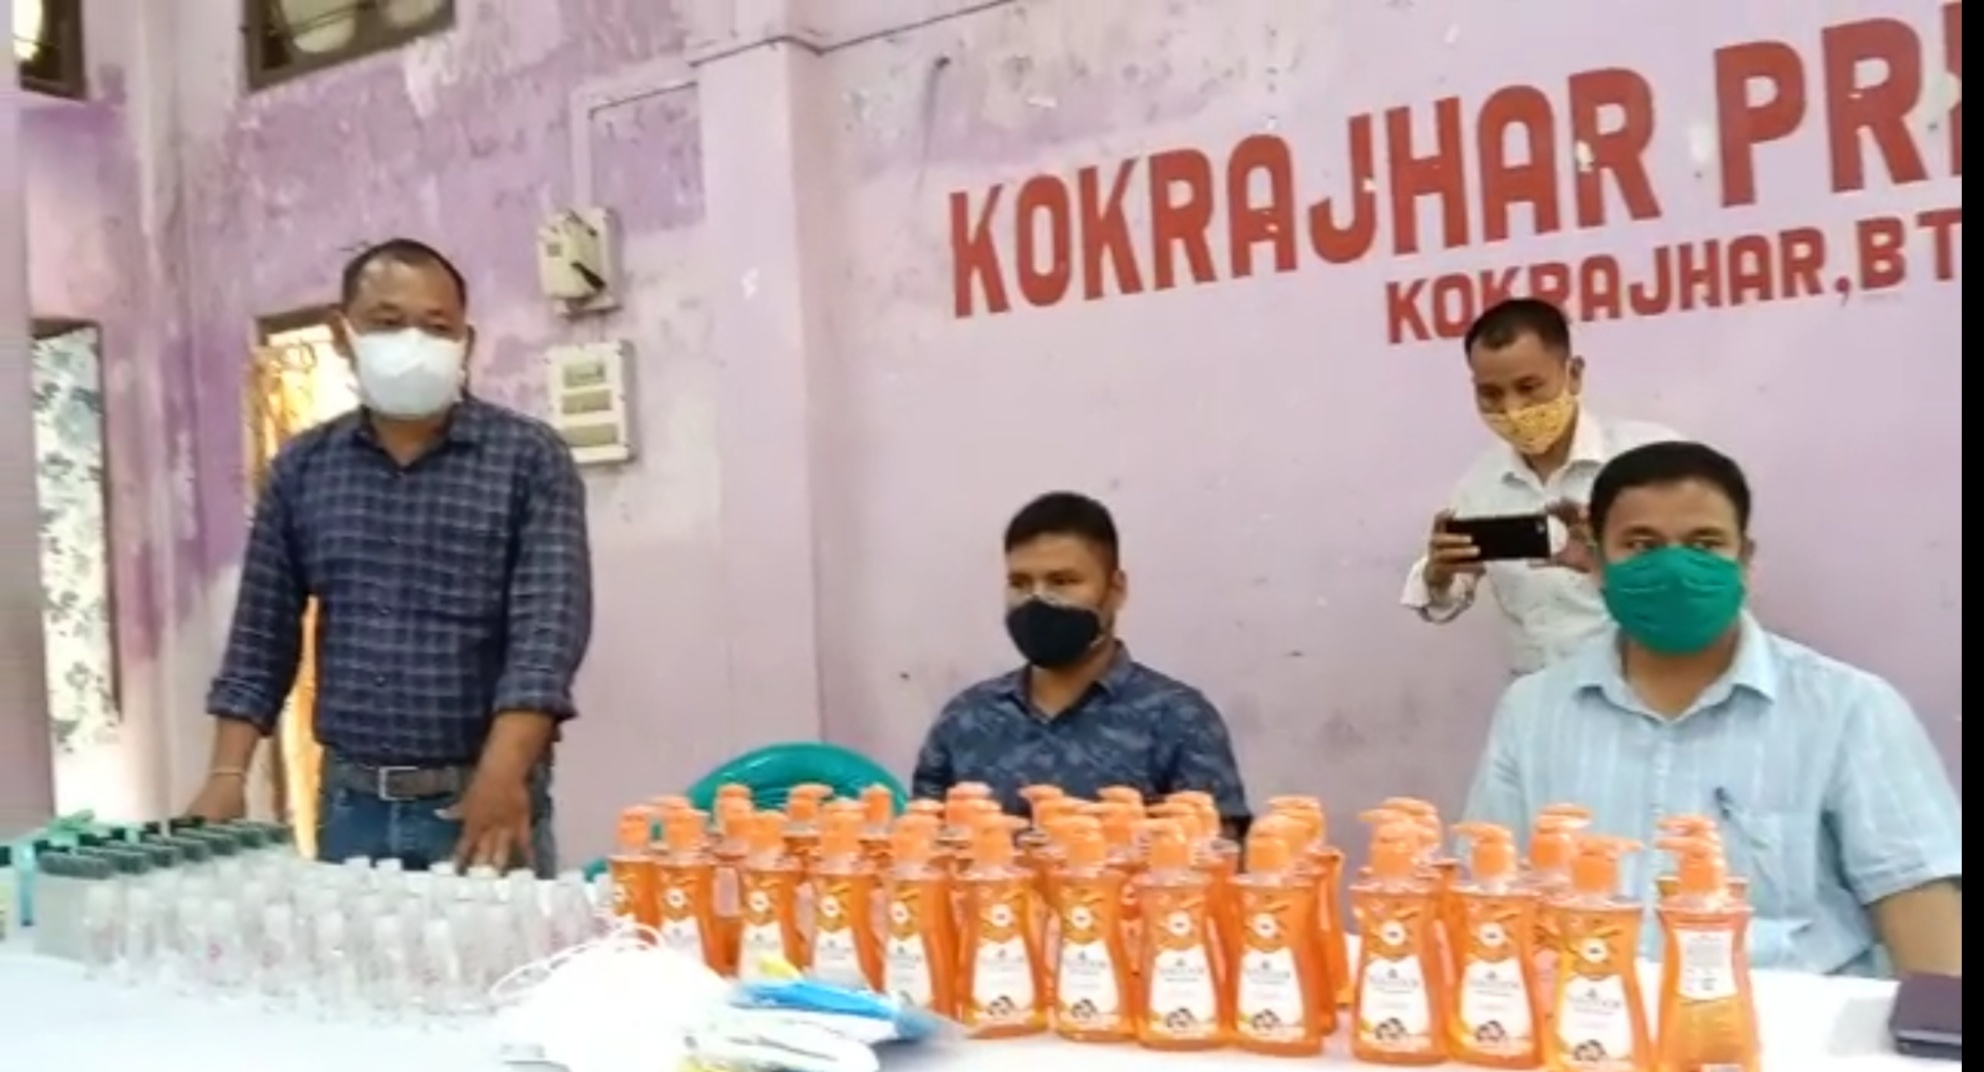 Daobaisa bodo distributed free masks and senitizers among journalists